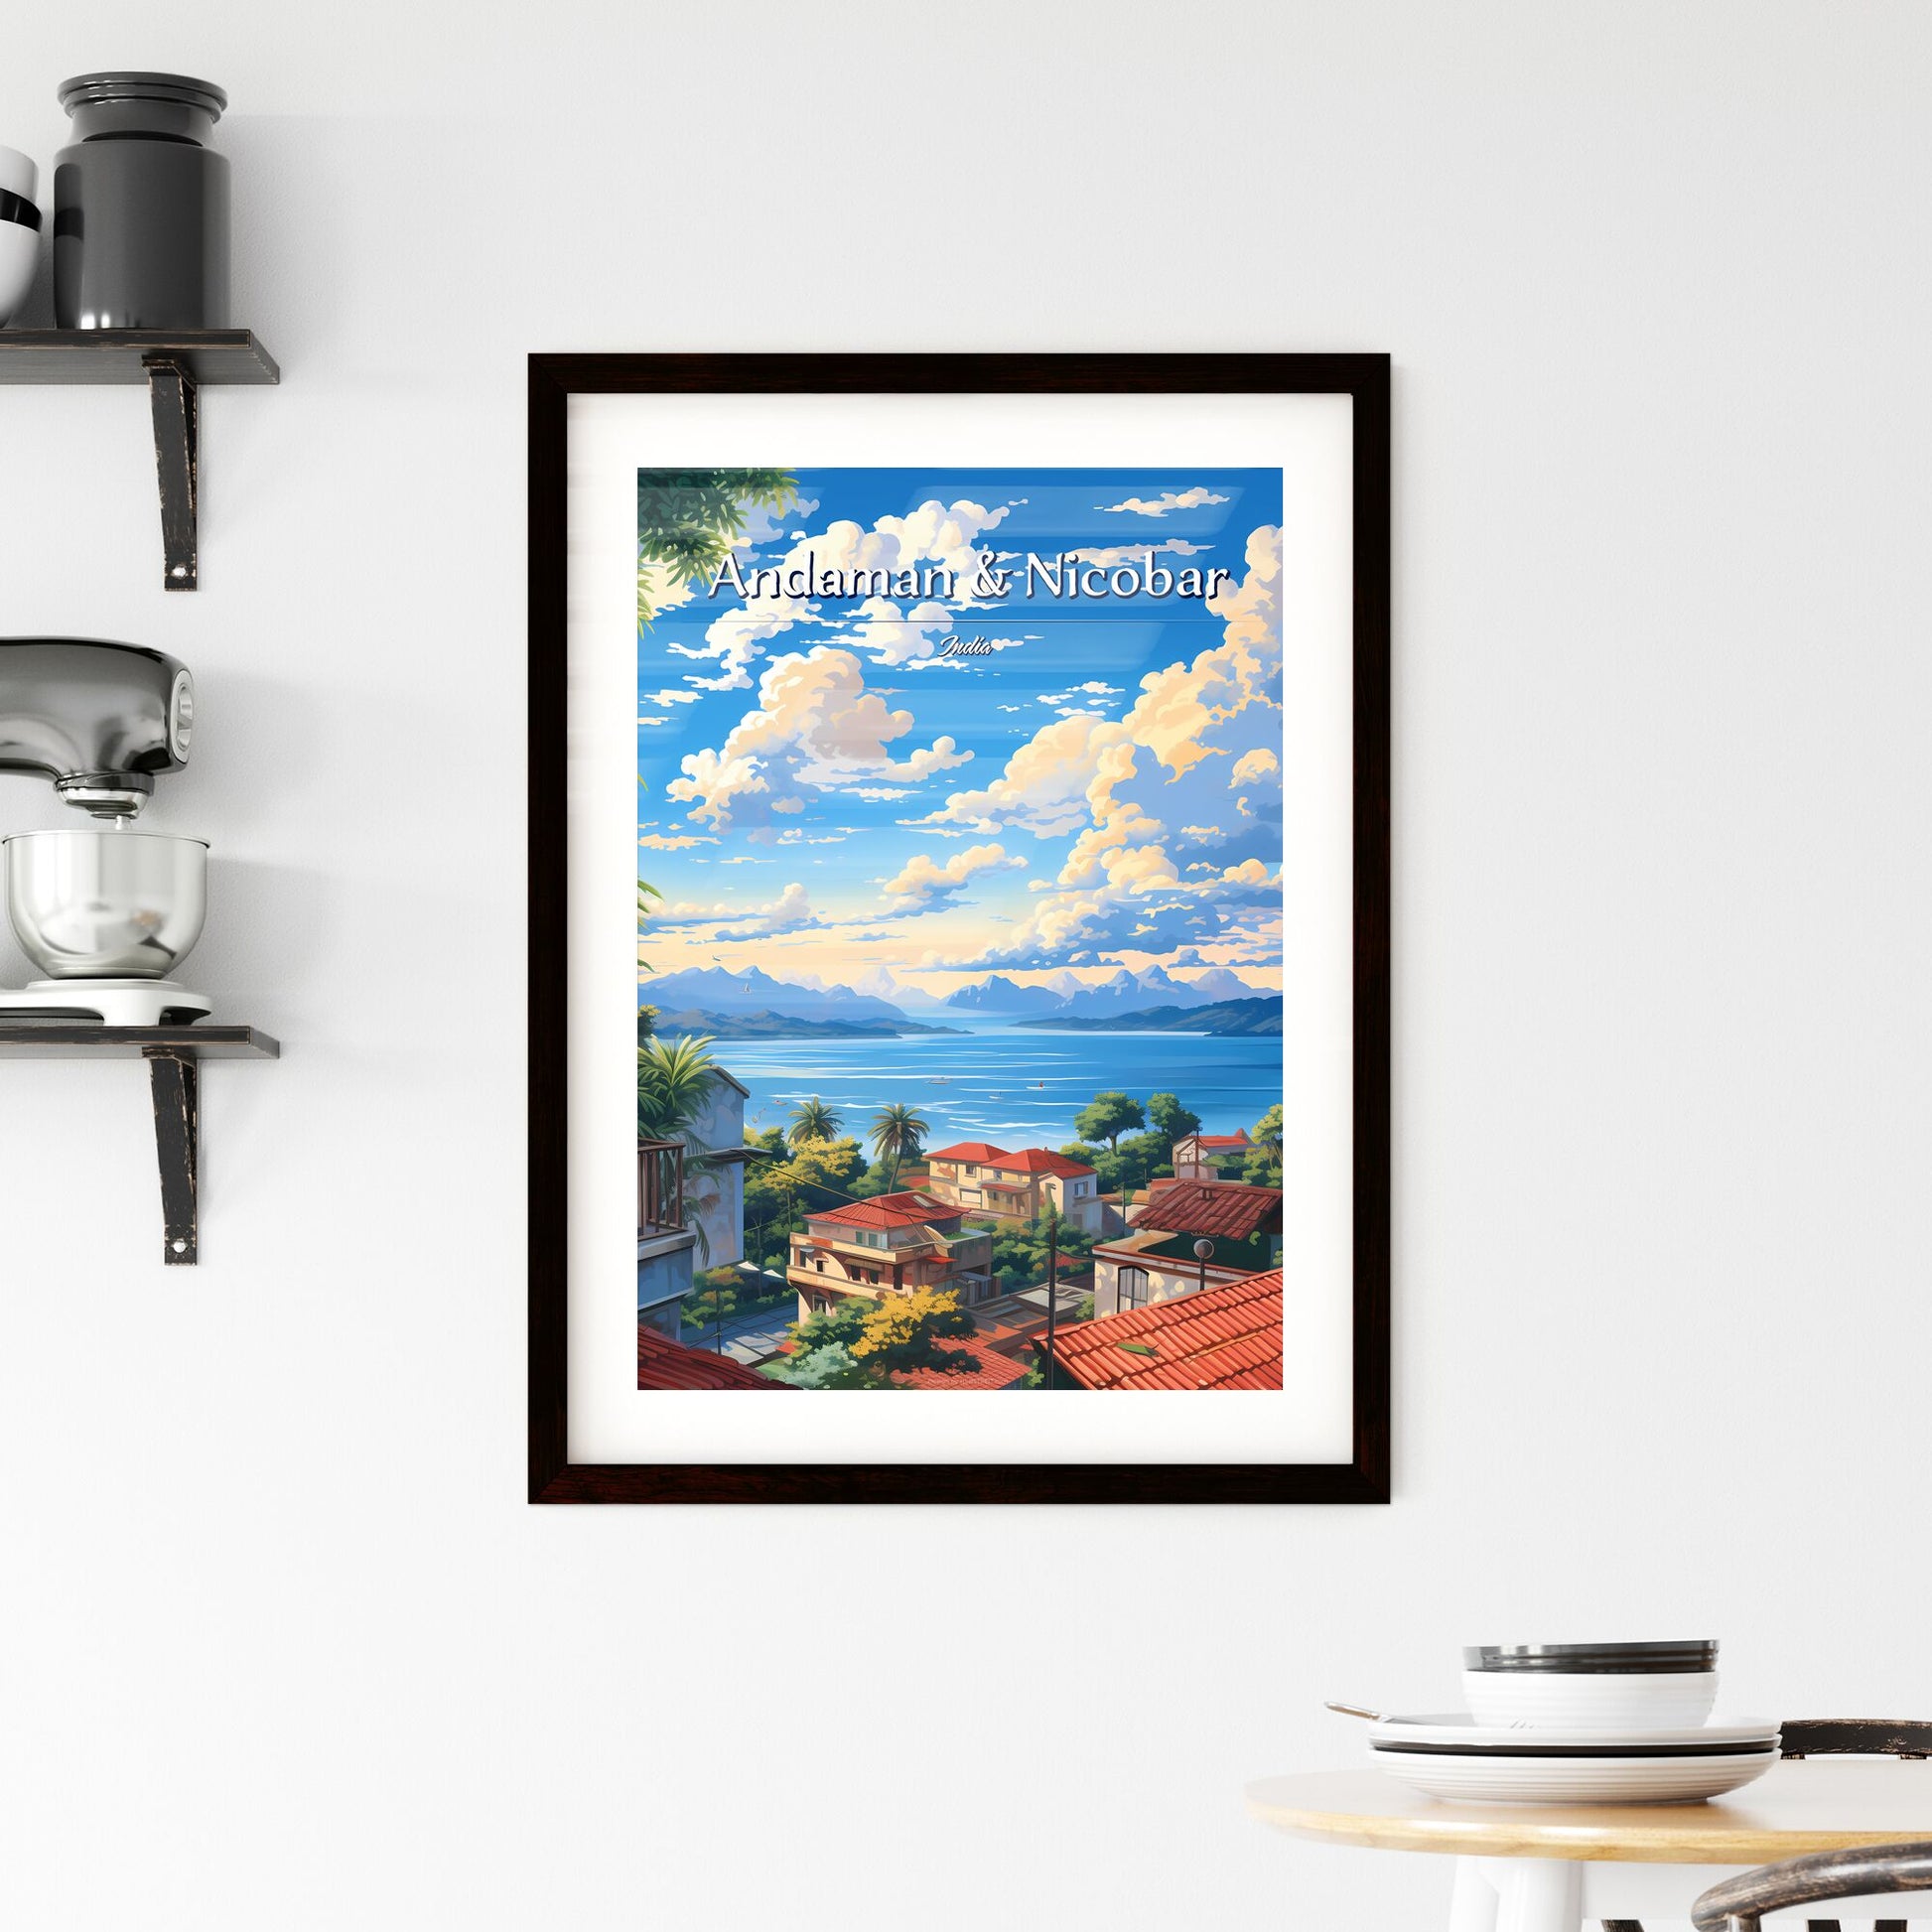 On the roofs of The Andaman & Nicobar Islands, India - Art print of a view of a town with a body of water and mountains Default Title